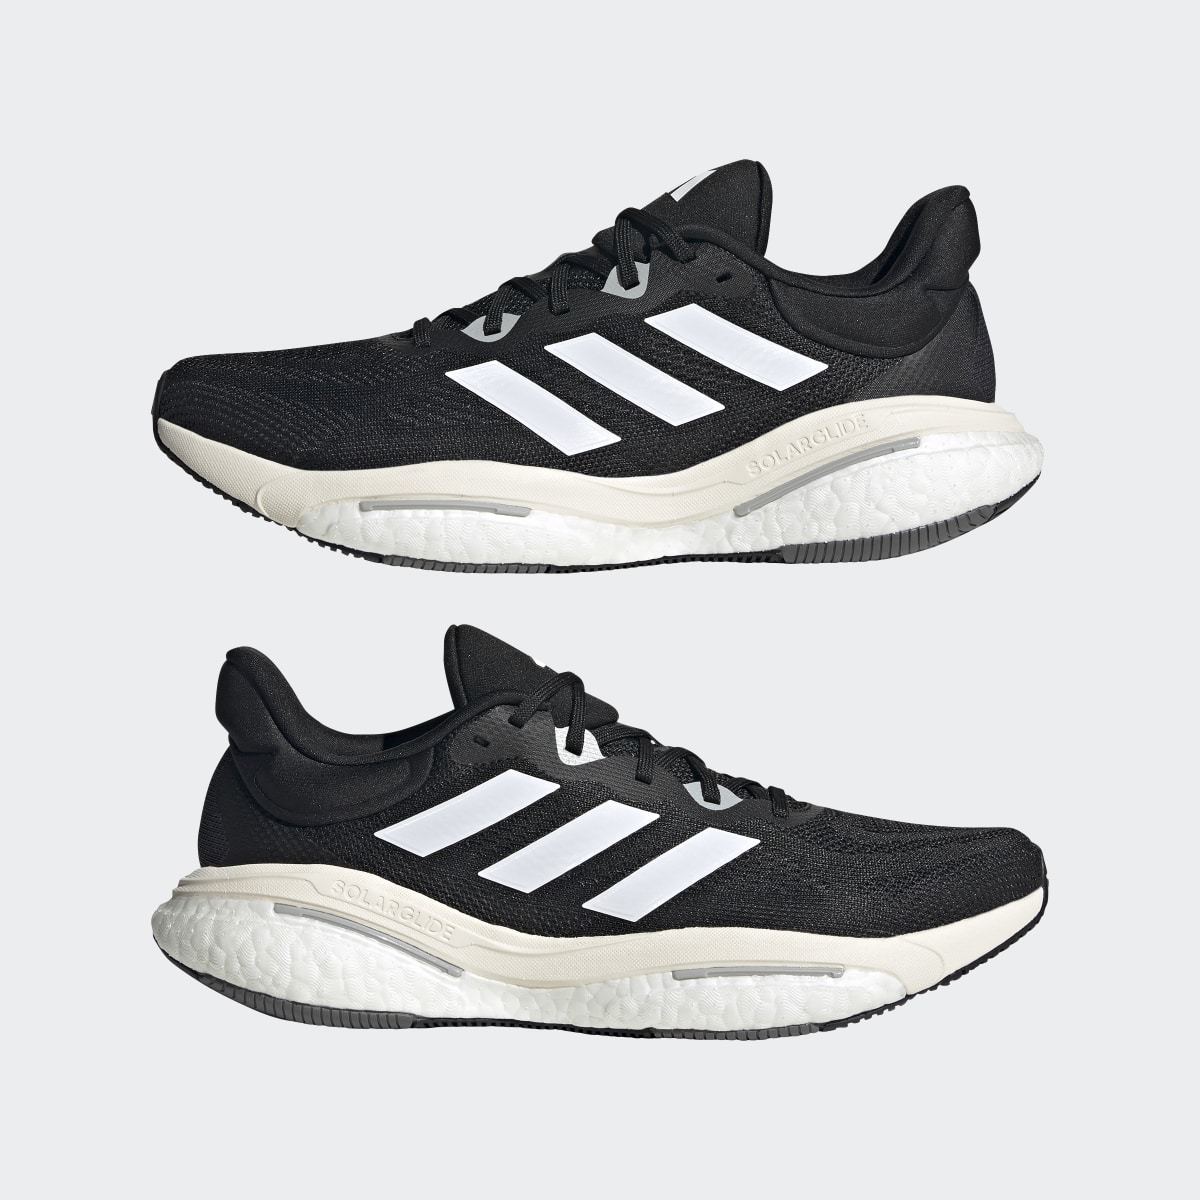 Adidas Solarglide 6 Running Shoes. 8